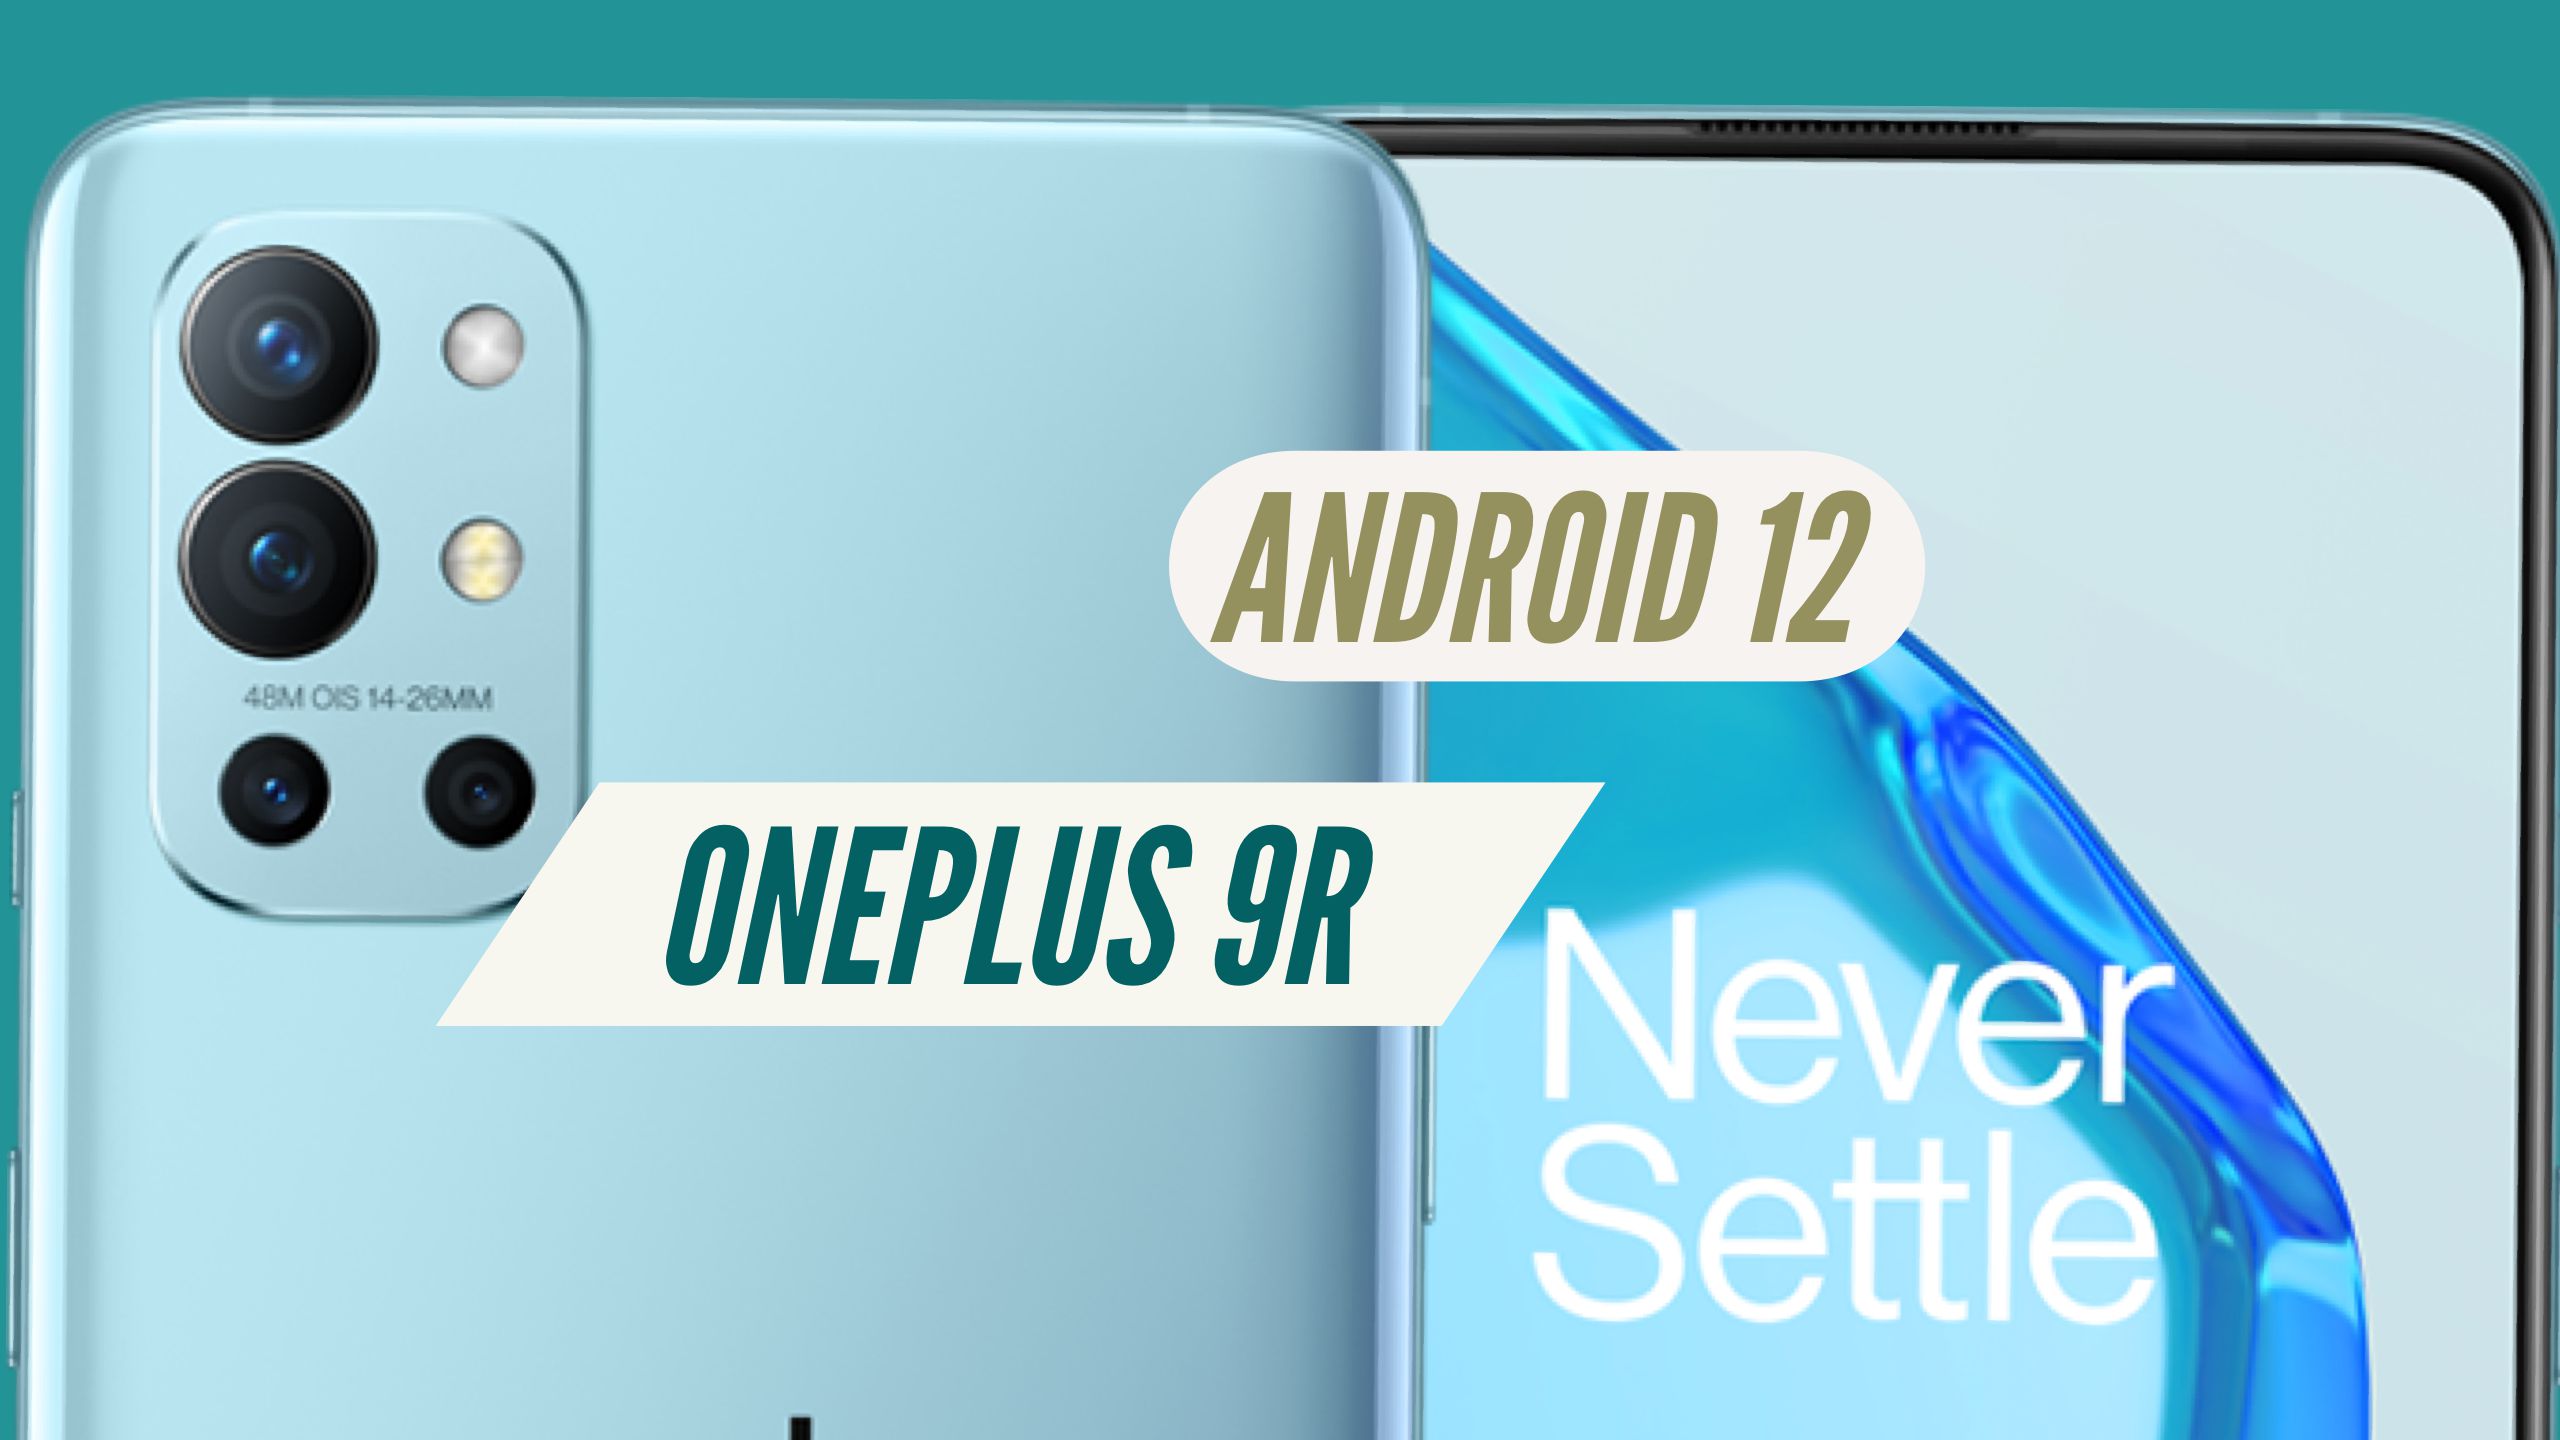 OnePlus 9R Android 12 Software Update